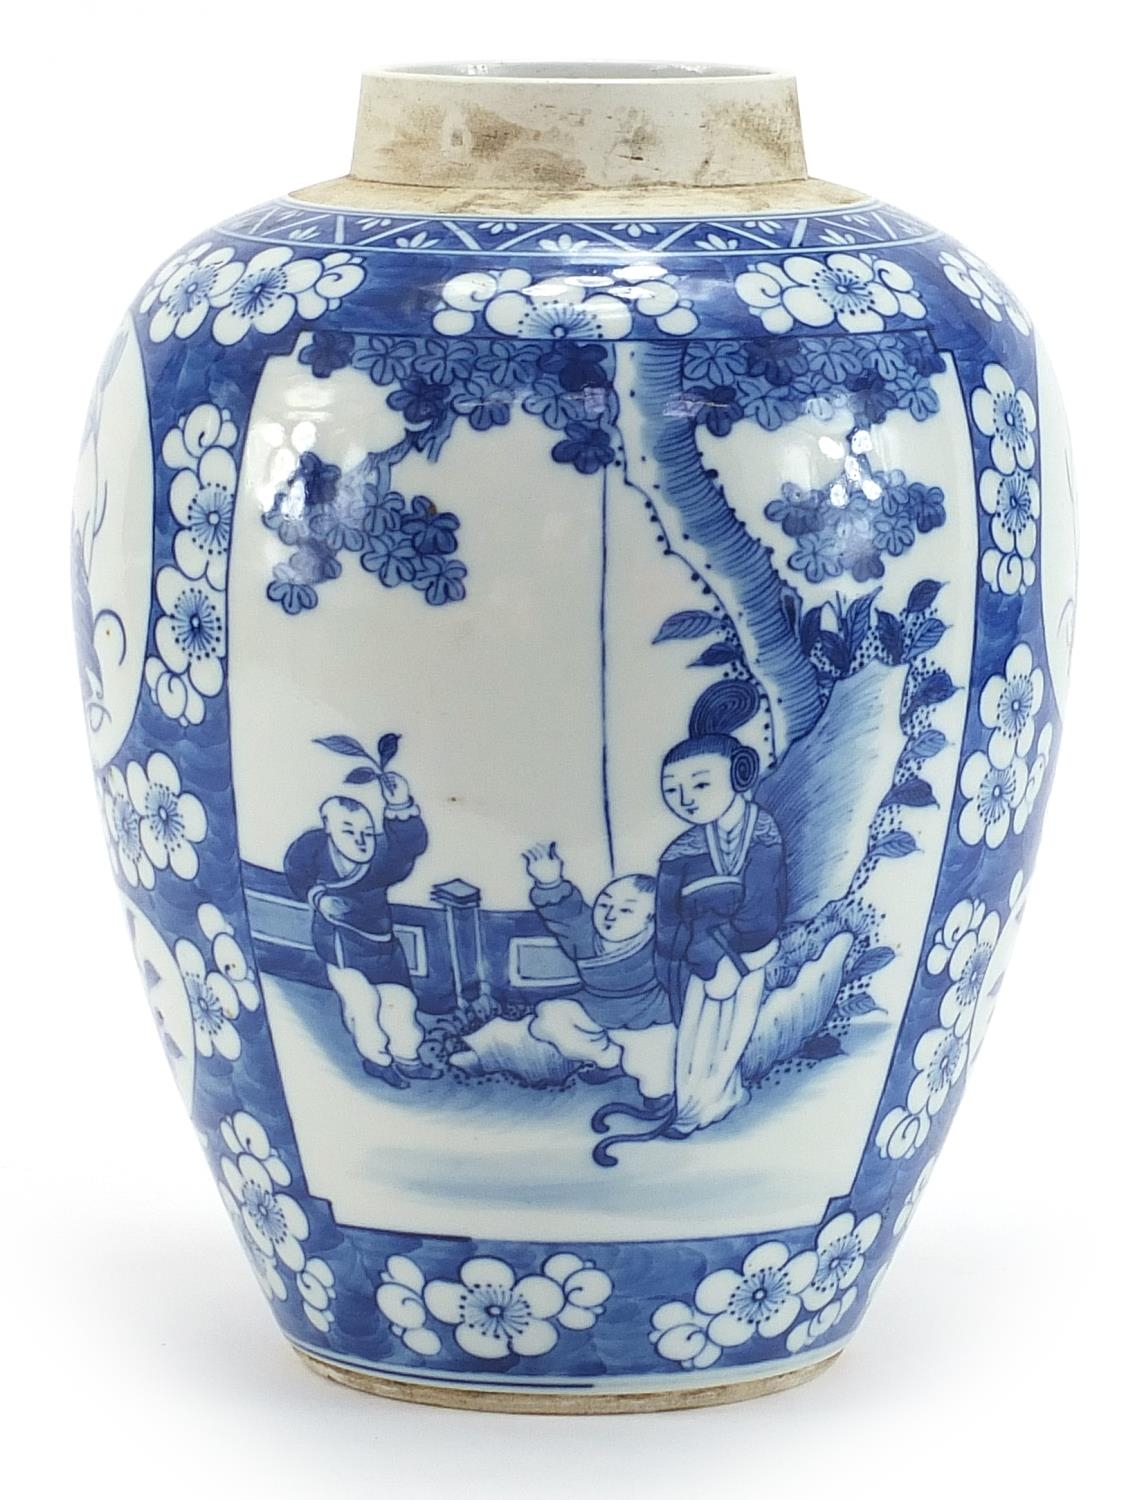 Large Chinese blue and white porcelain ginger jar hand painted with panels of figures and flowers - Image 2 of 3